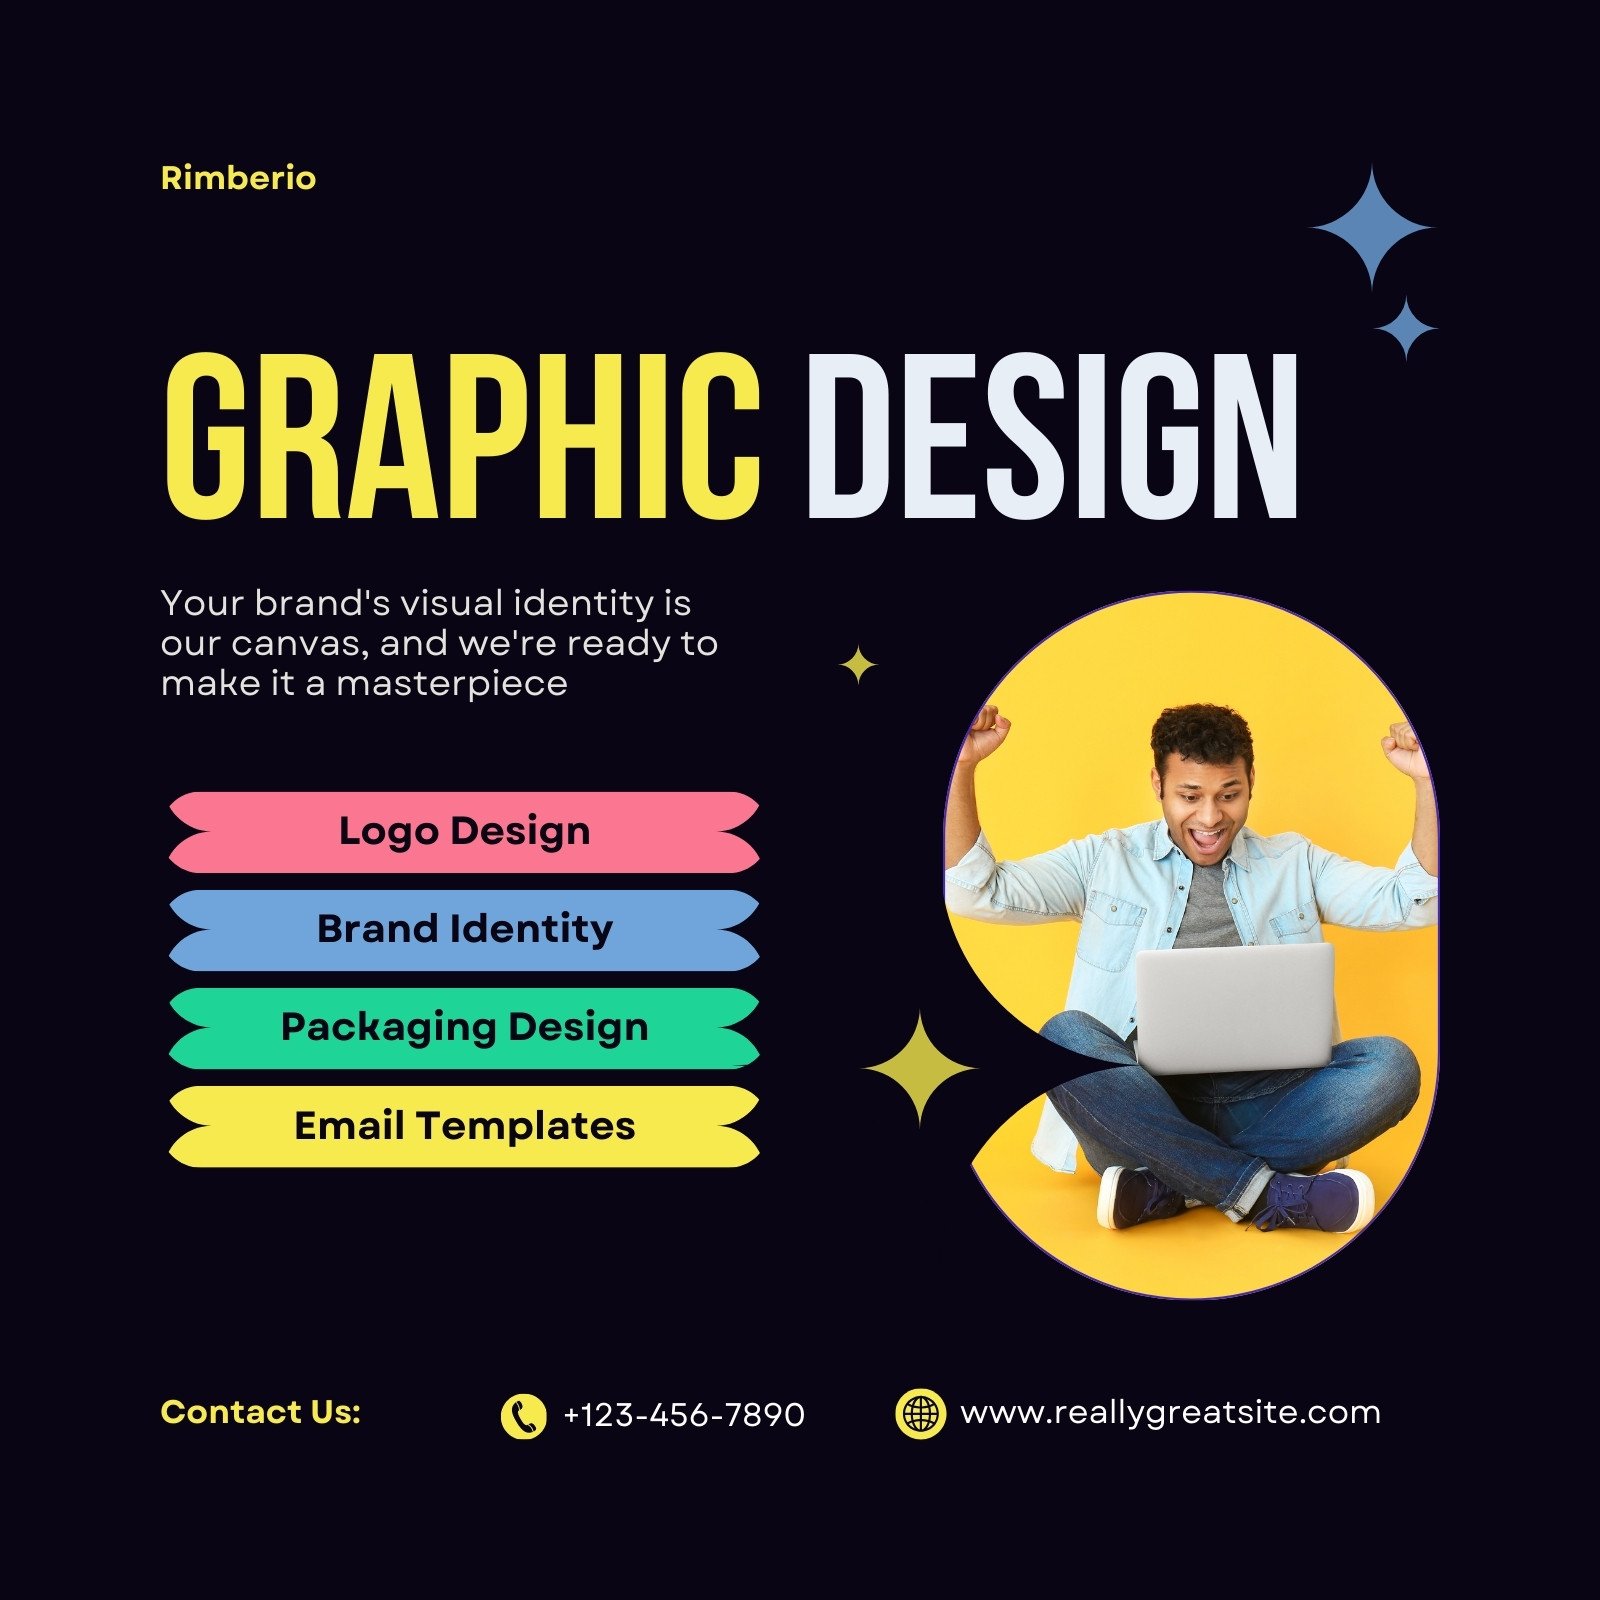 Free and customizable graphic design templates